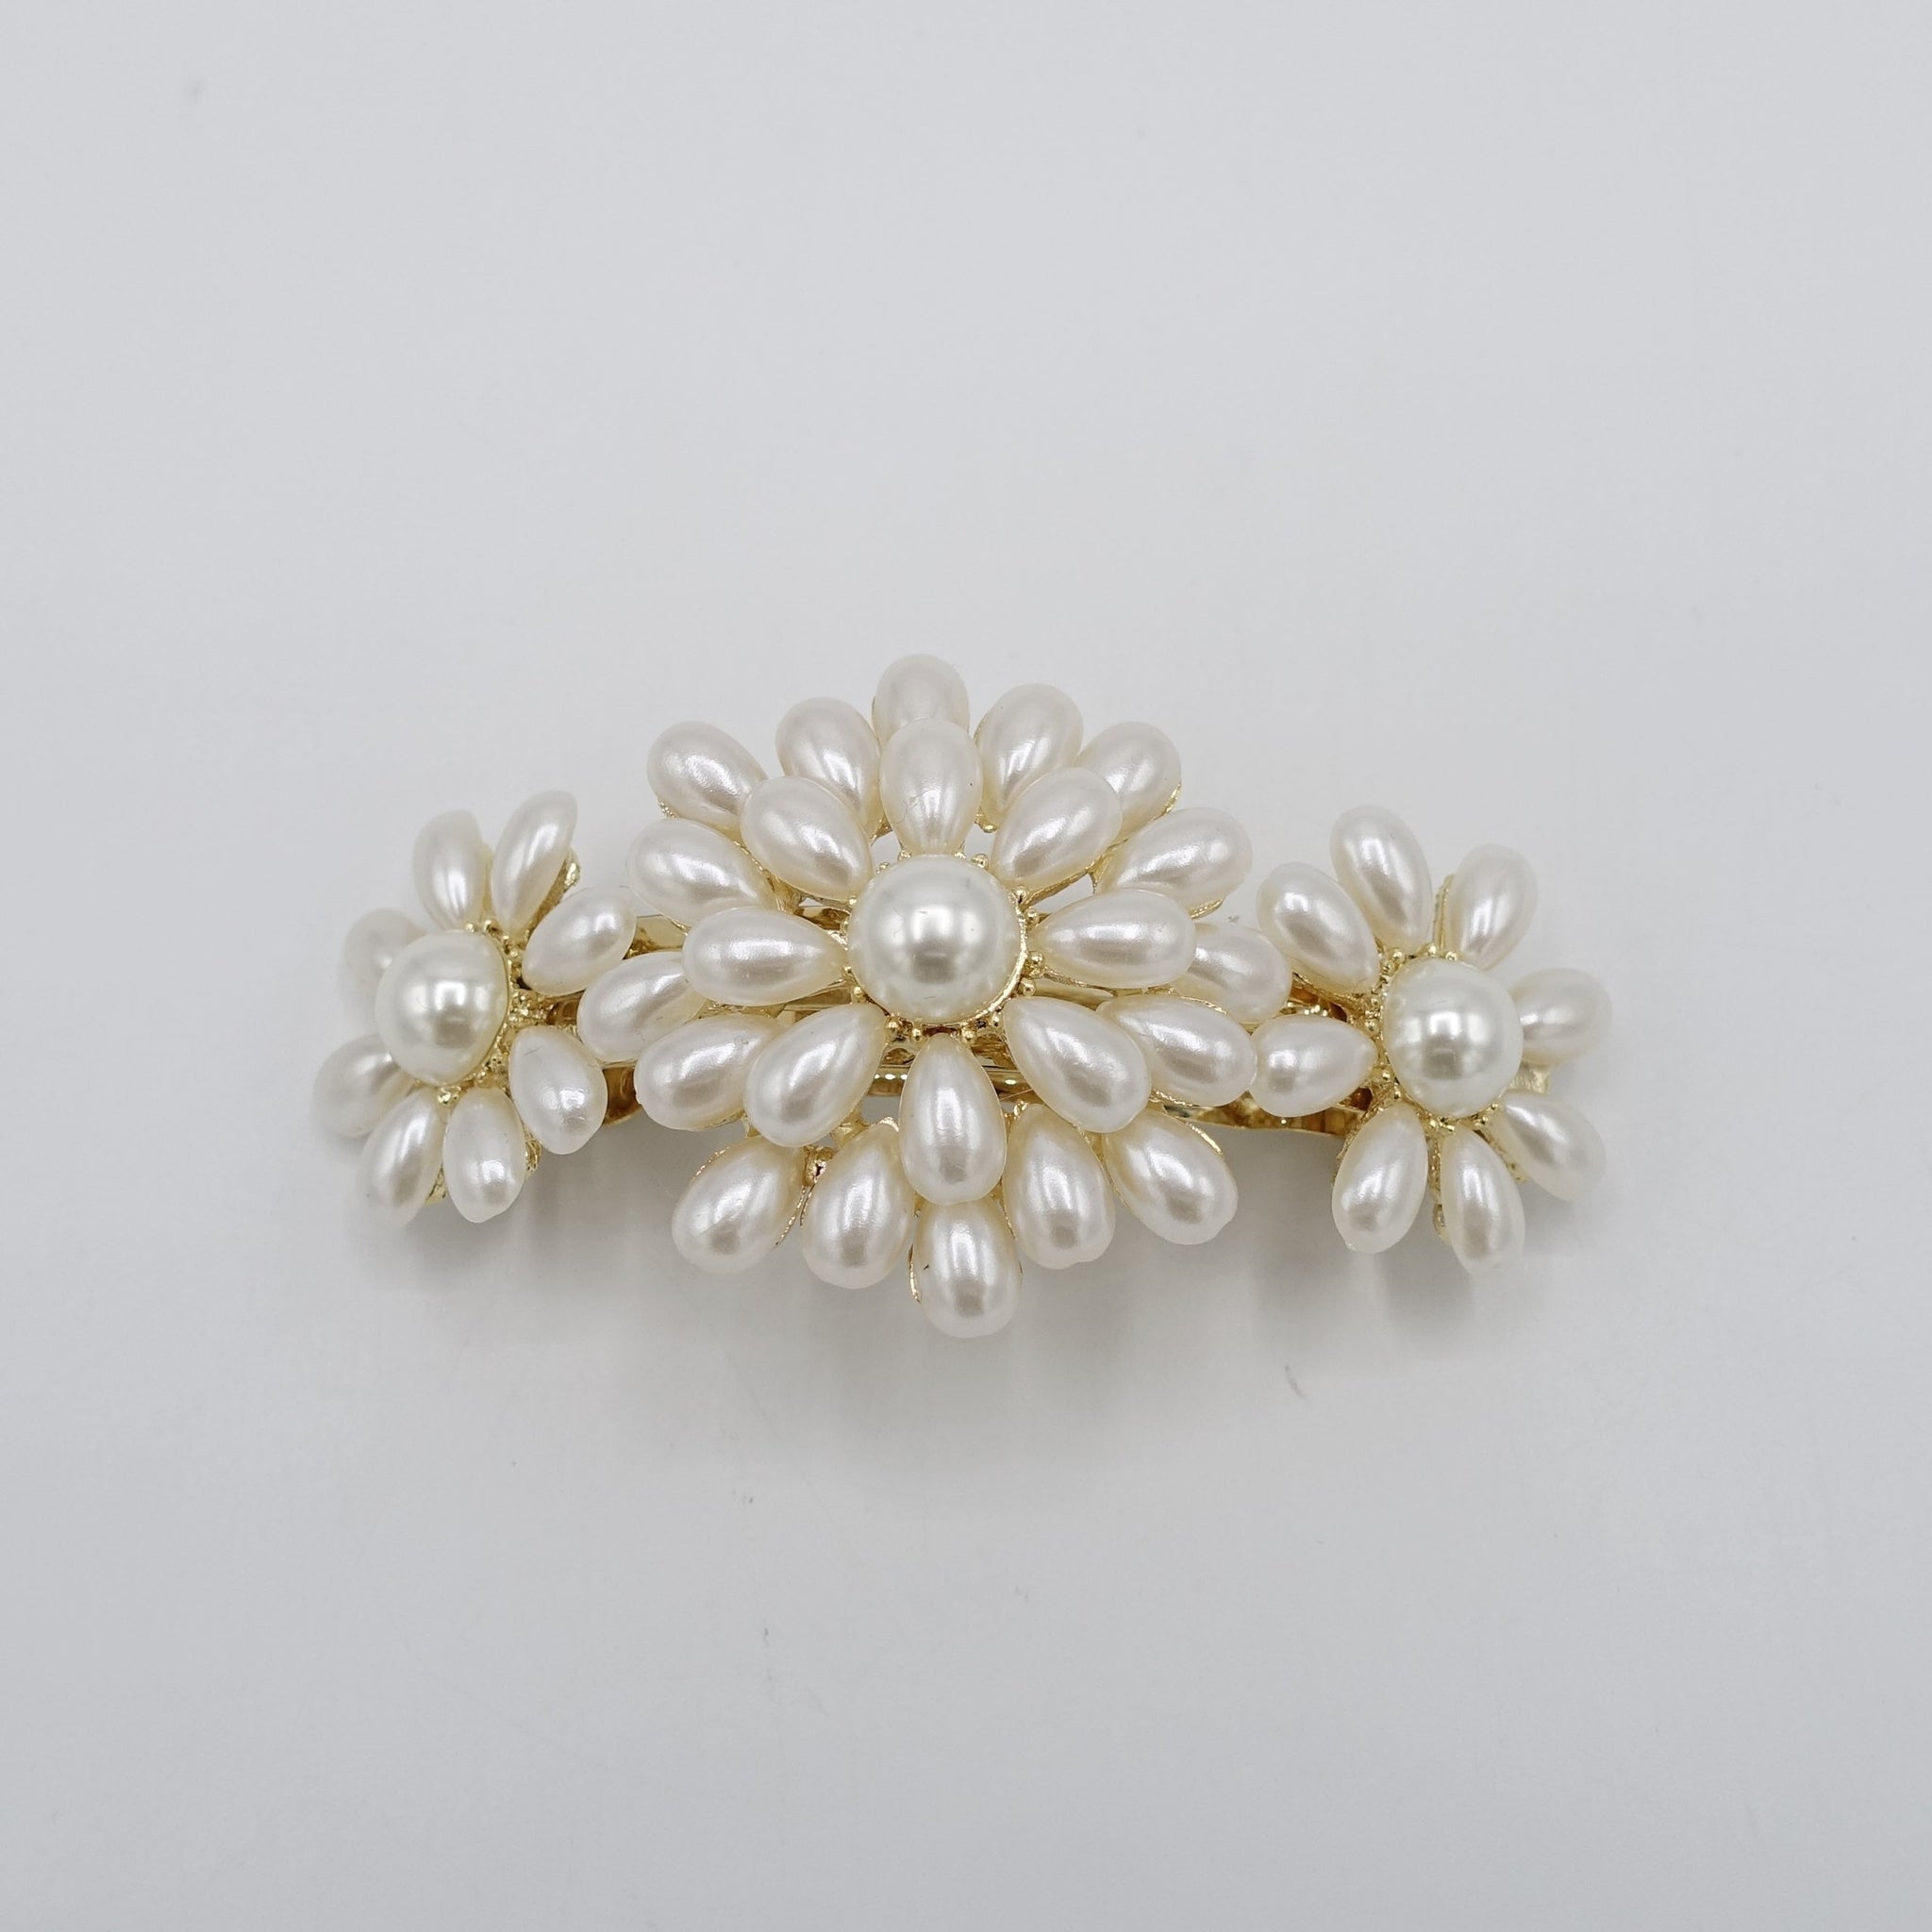 VeryShine claw/banana/barrette pearl flower embellished french hair barrette hair accessory for women